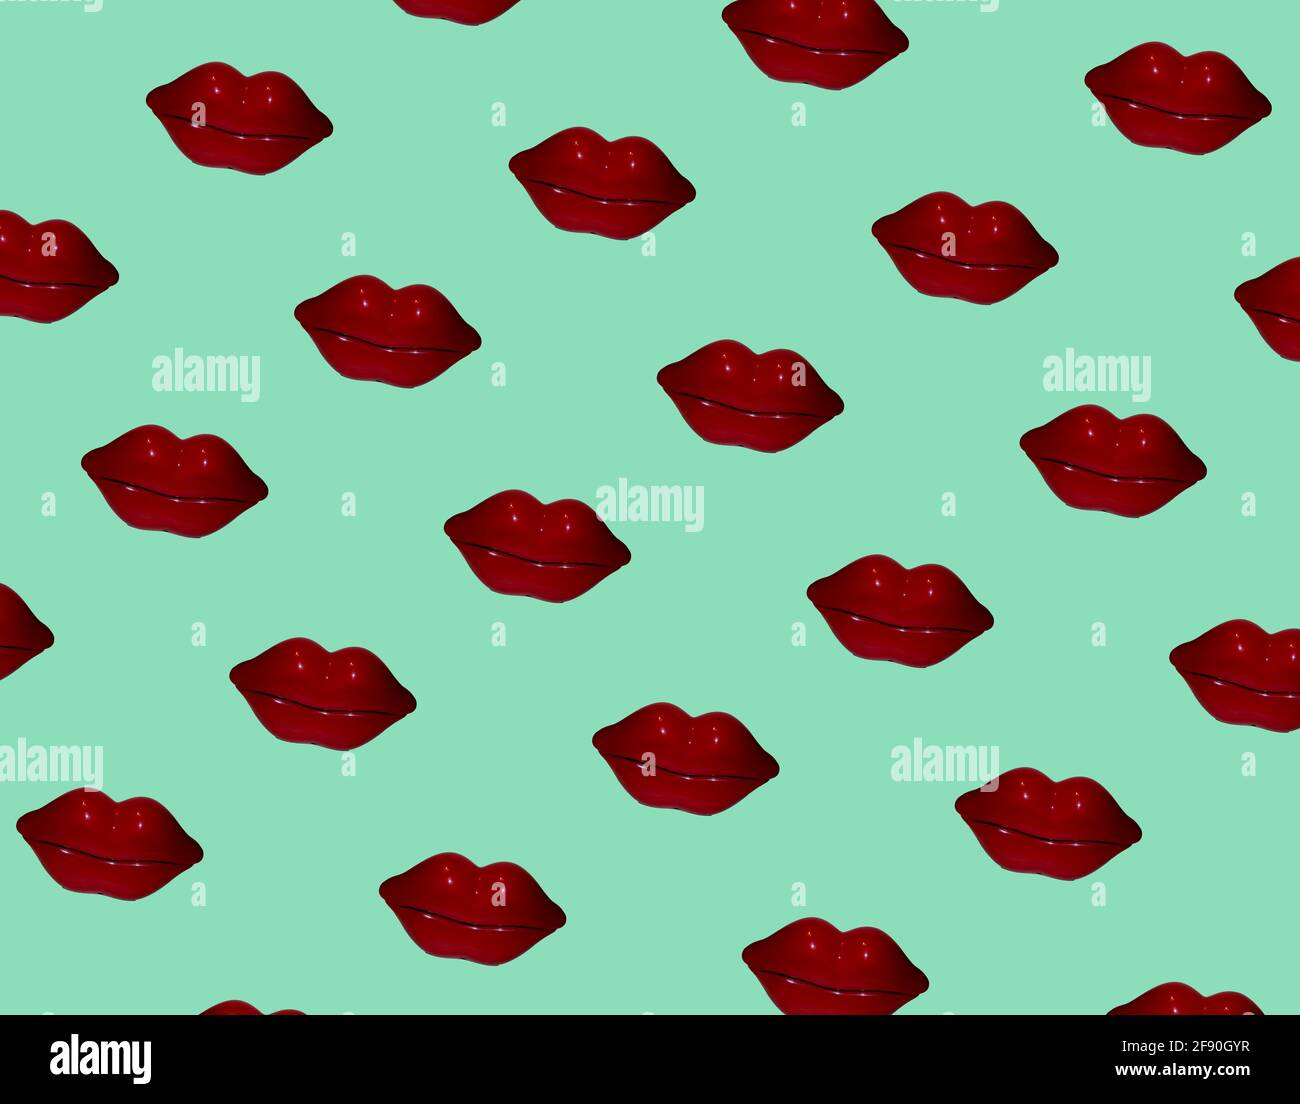 Dark red lips multiplied on soft green background. Minimal abstract pattern composition. Valentines, love, sending kisses idea. Stock Photo